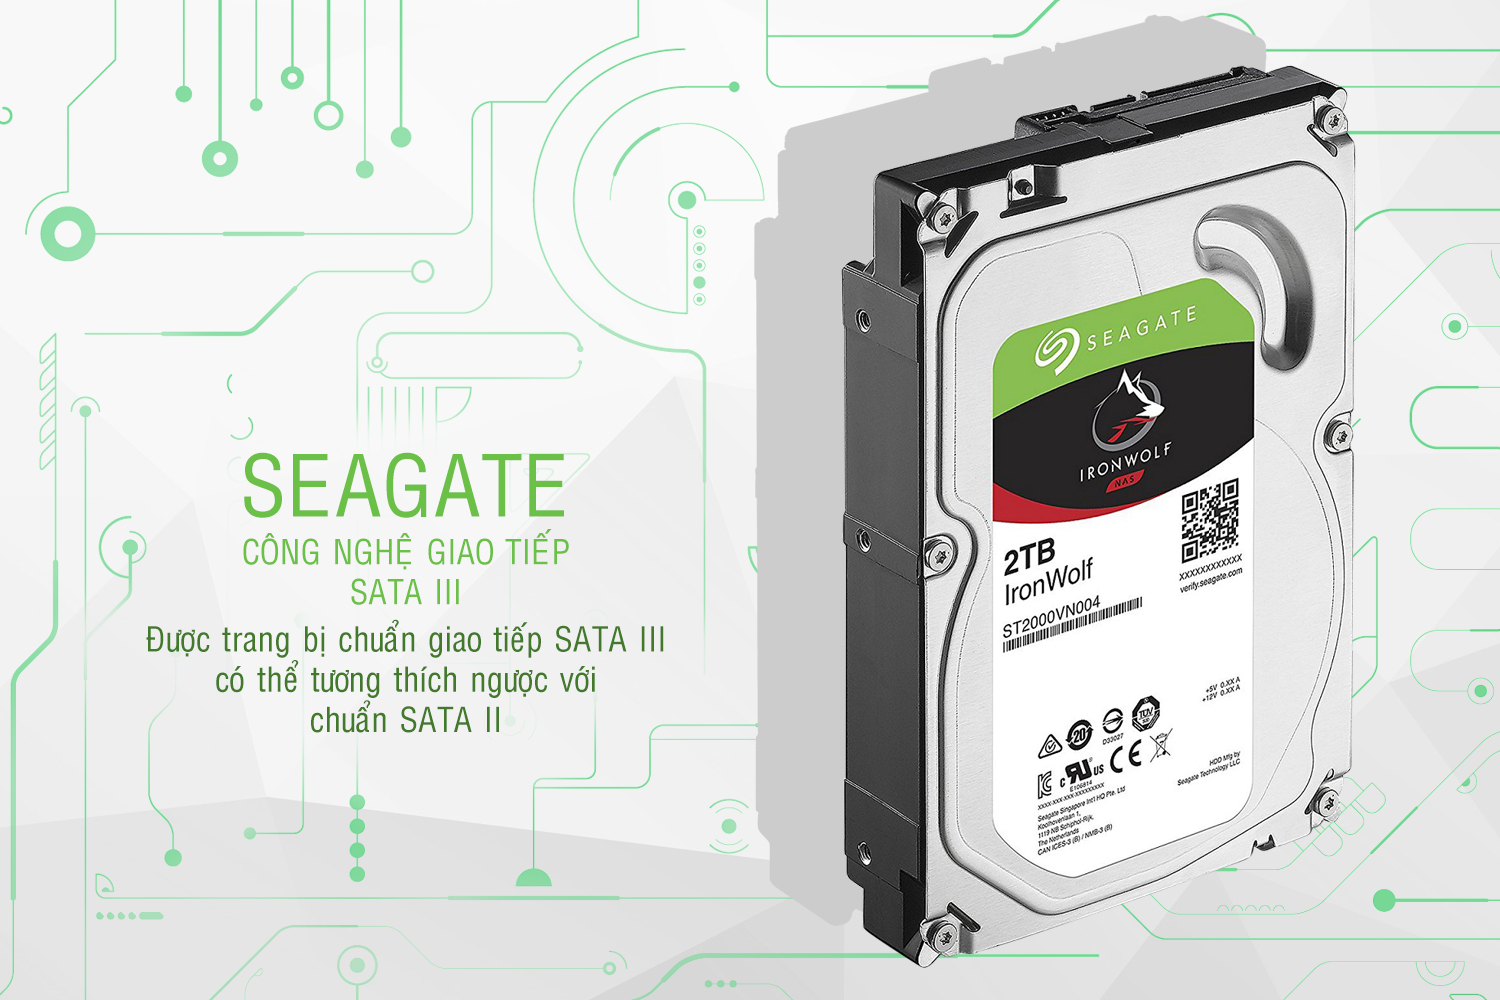 Ổ Cứng Trong Seagate IronWolf 2TB/64MB/3.5 - ST2000VN004